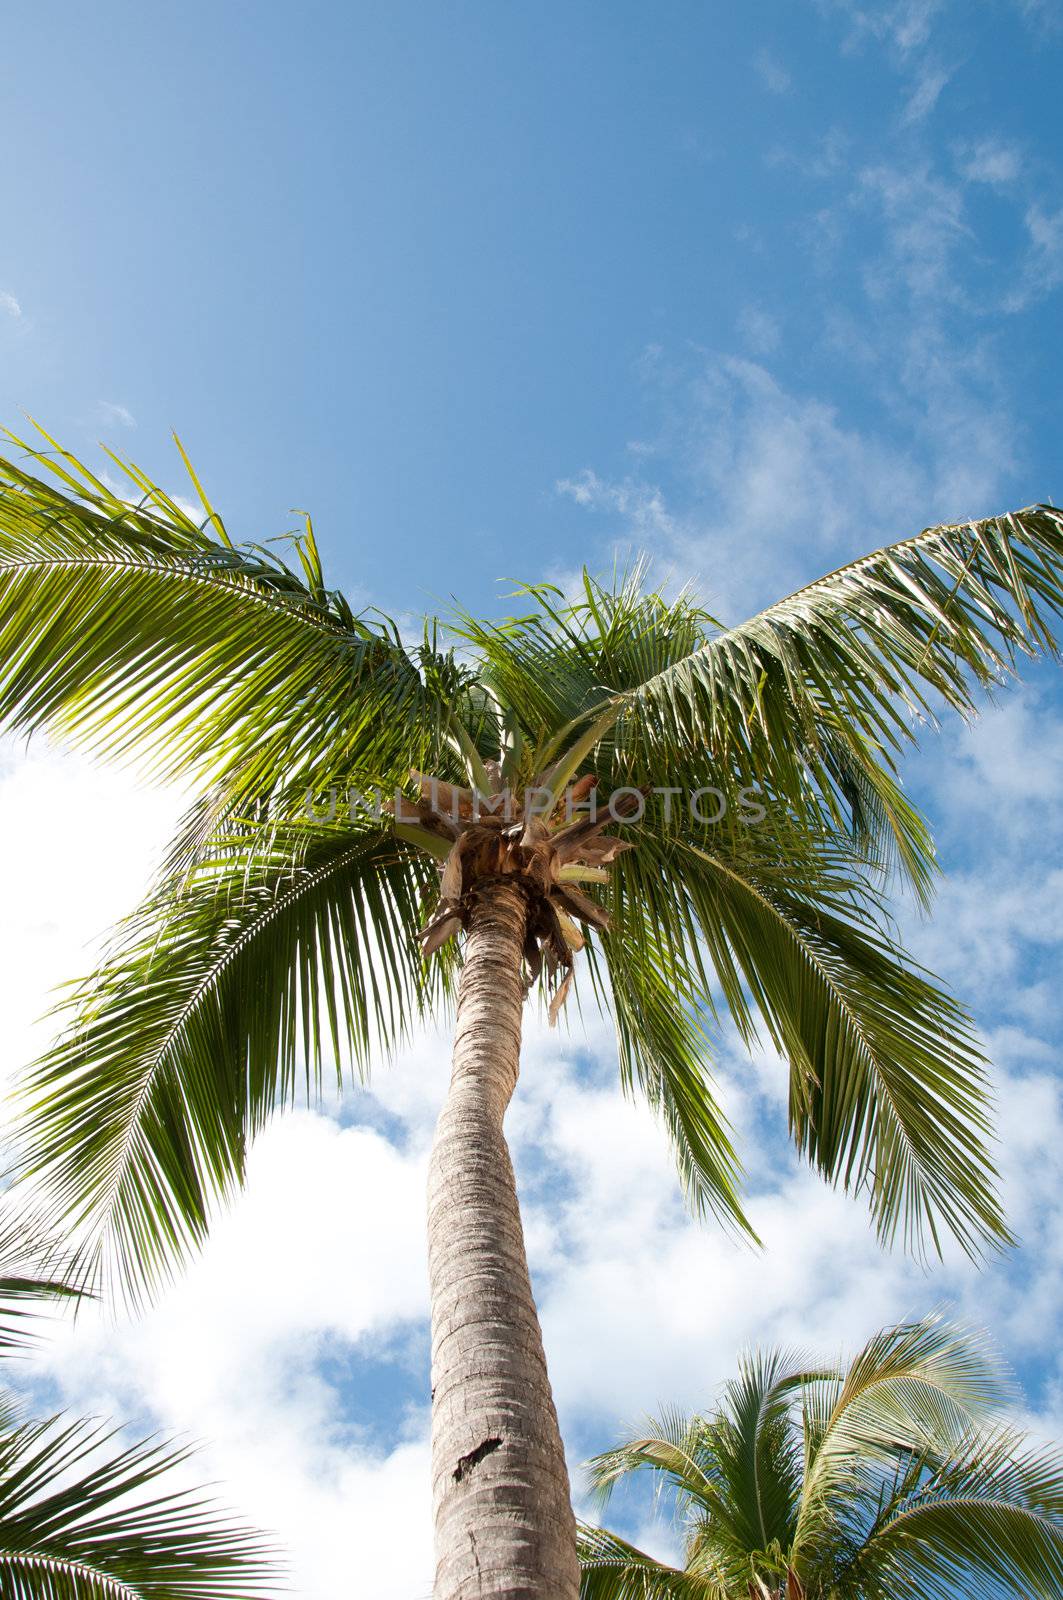 Image of palm trees against a blue sky.